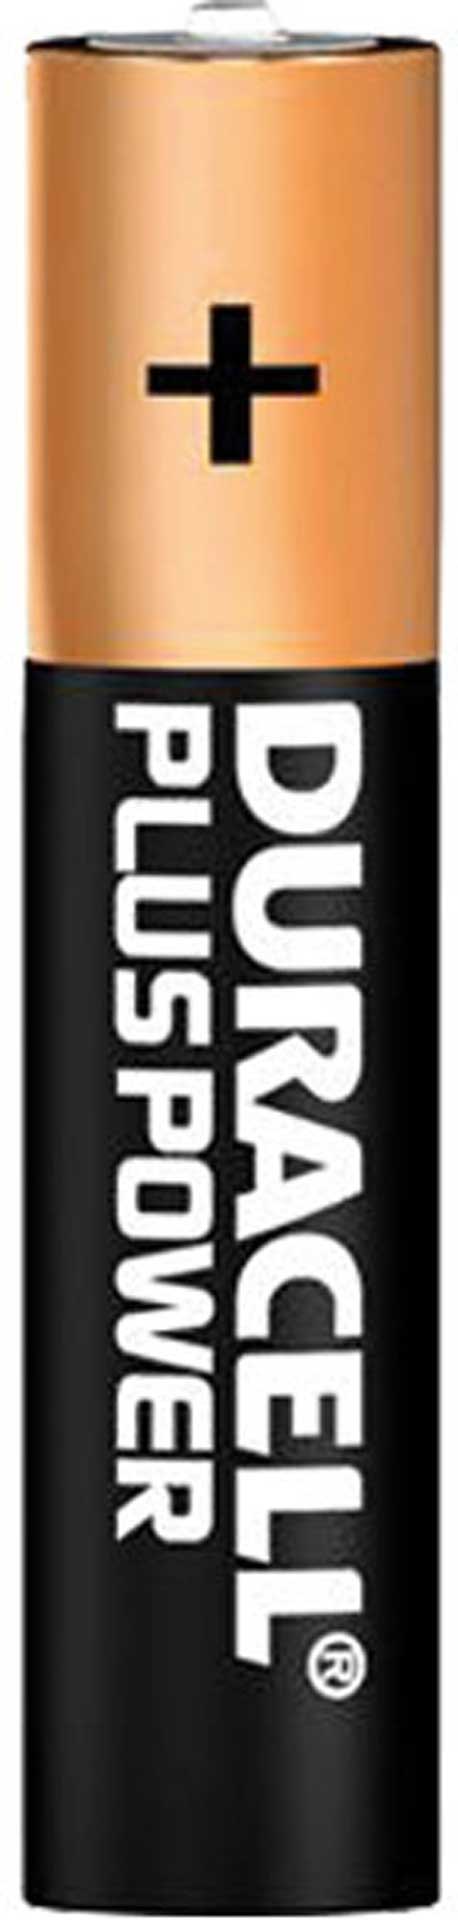 DURACELL PLUS POWER MN2400B MICRO AAA BATTERIE 4 PIÈCES